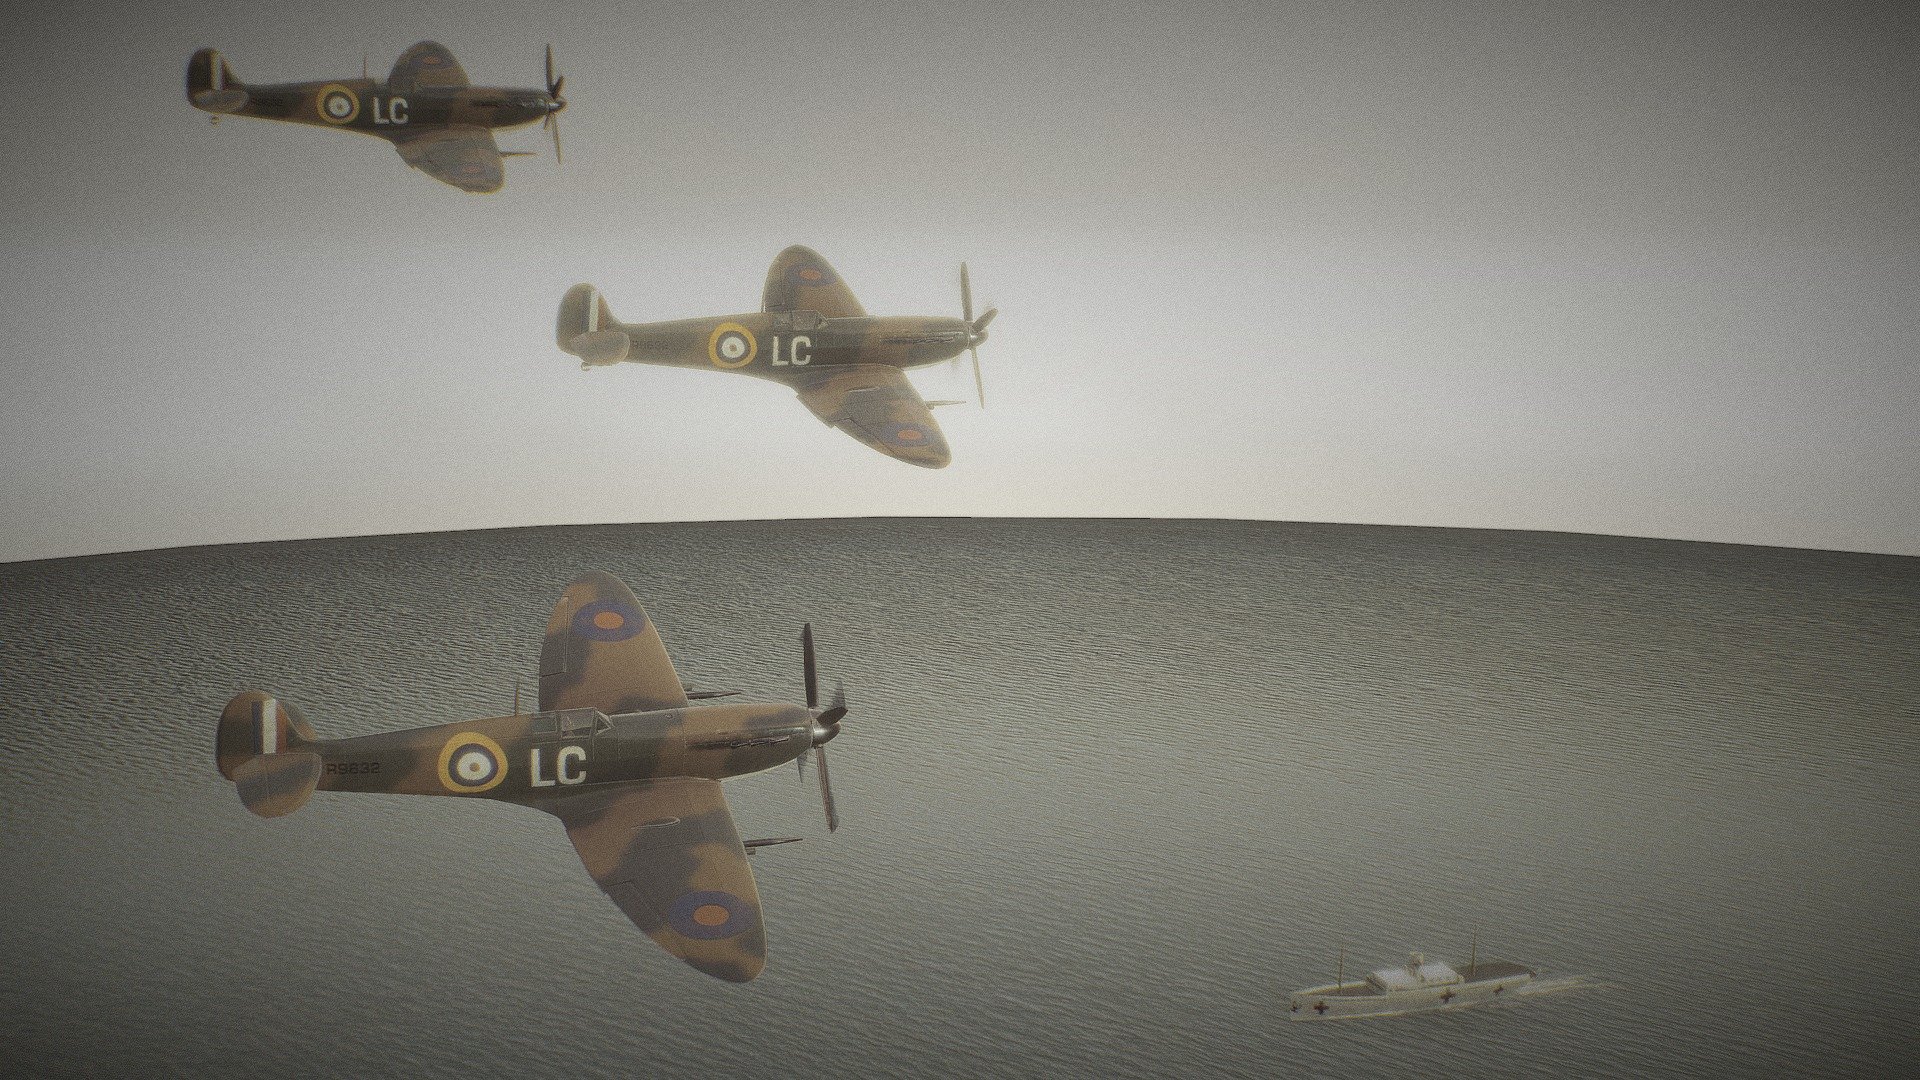 Aircraft Painting Contest — Spitfire, Dunkirk